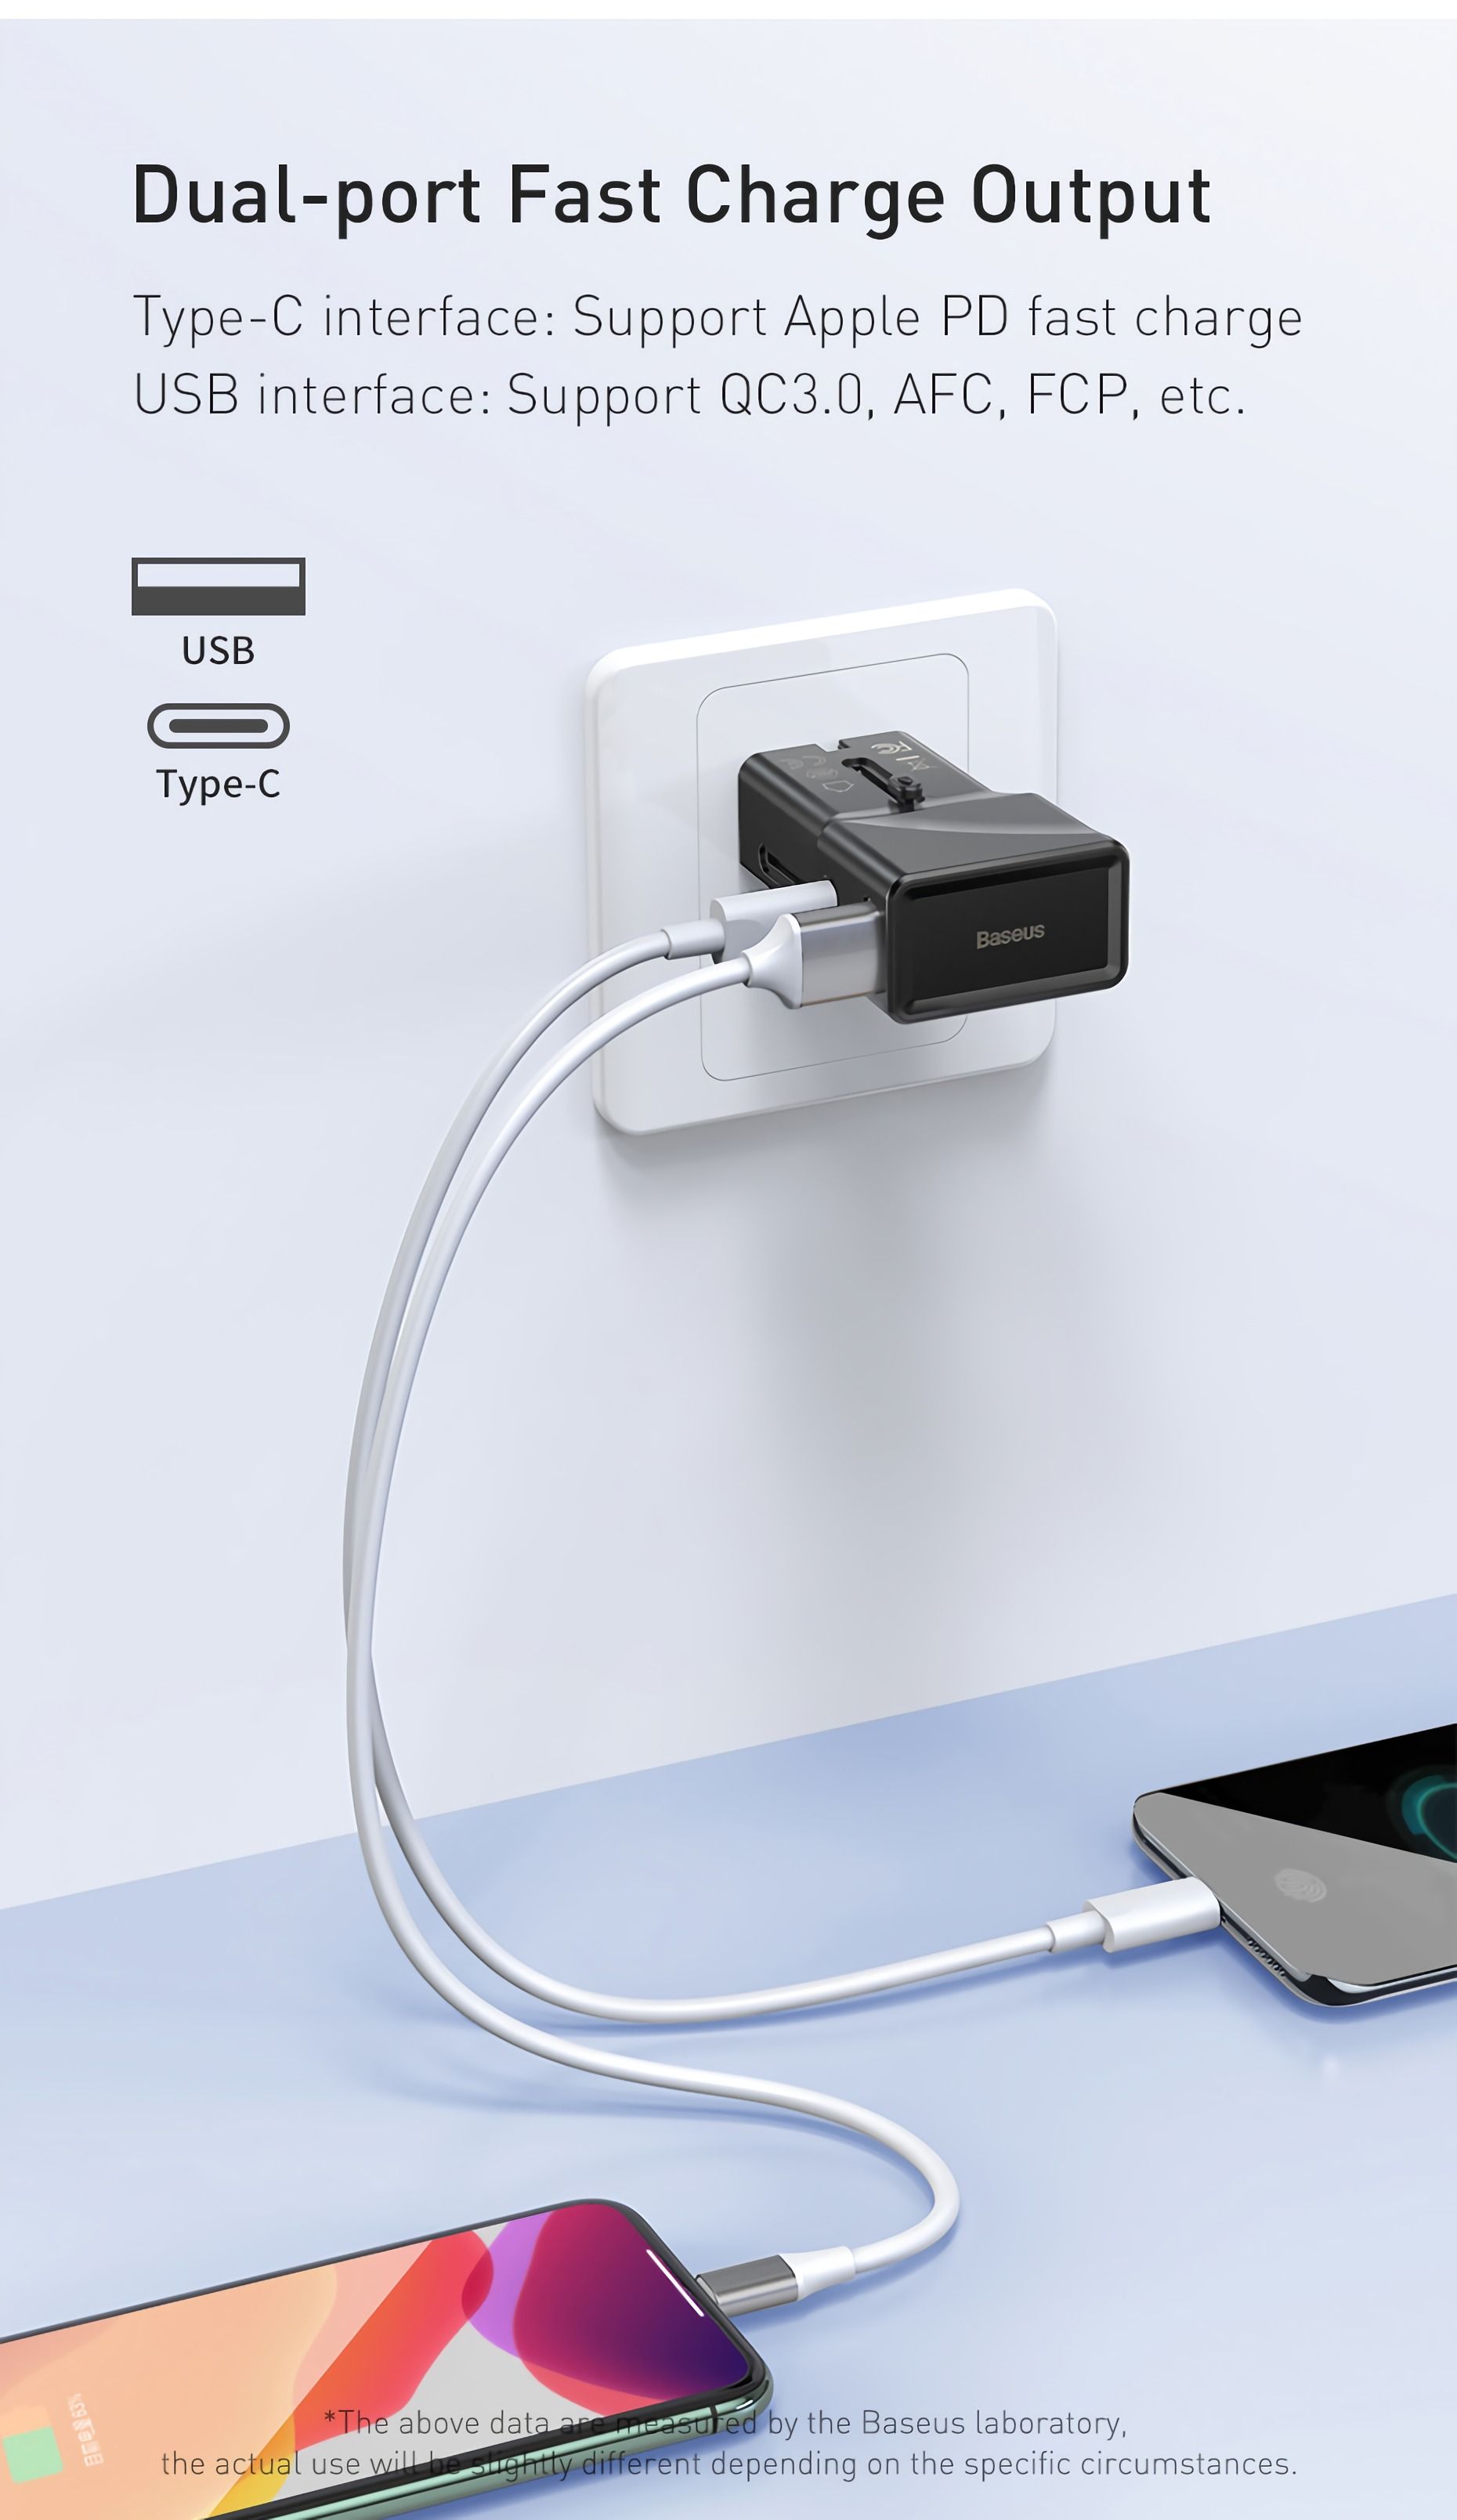 Baseus-Universal-USB-Charger-18W-QC-30-PD30-Fast-Charger-Quick-Charge-30-Travel-International-Plug-S-1701322